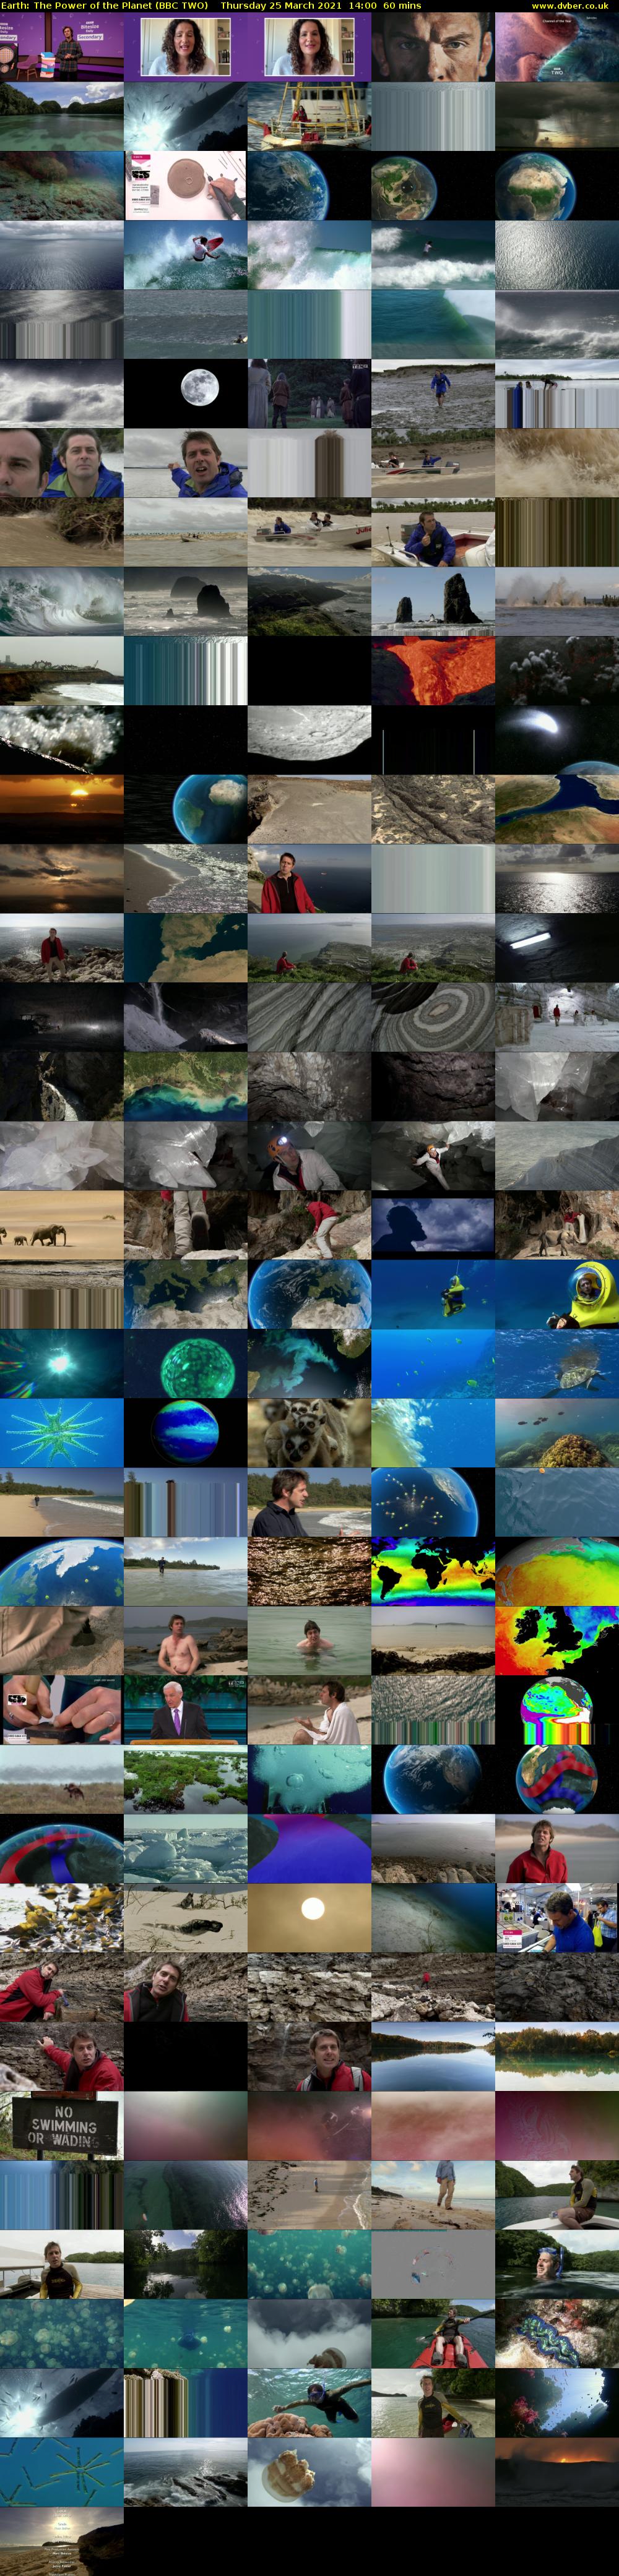 Earth: The Power of the Planet (BBC TWO) Thursday 25 March 2021 14:00 - 15:00